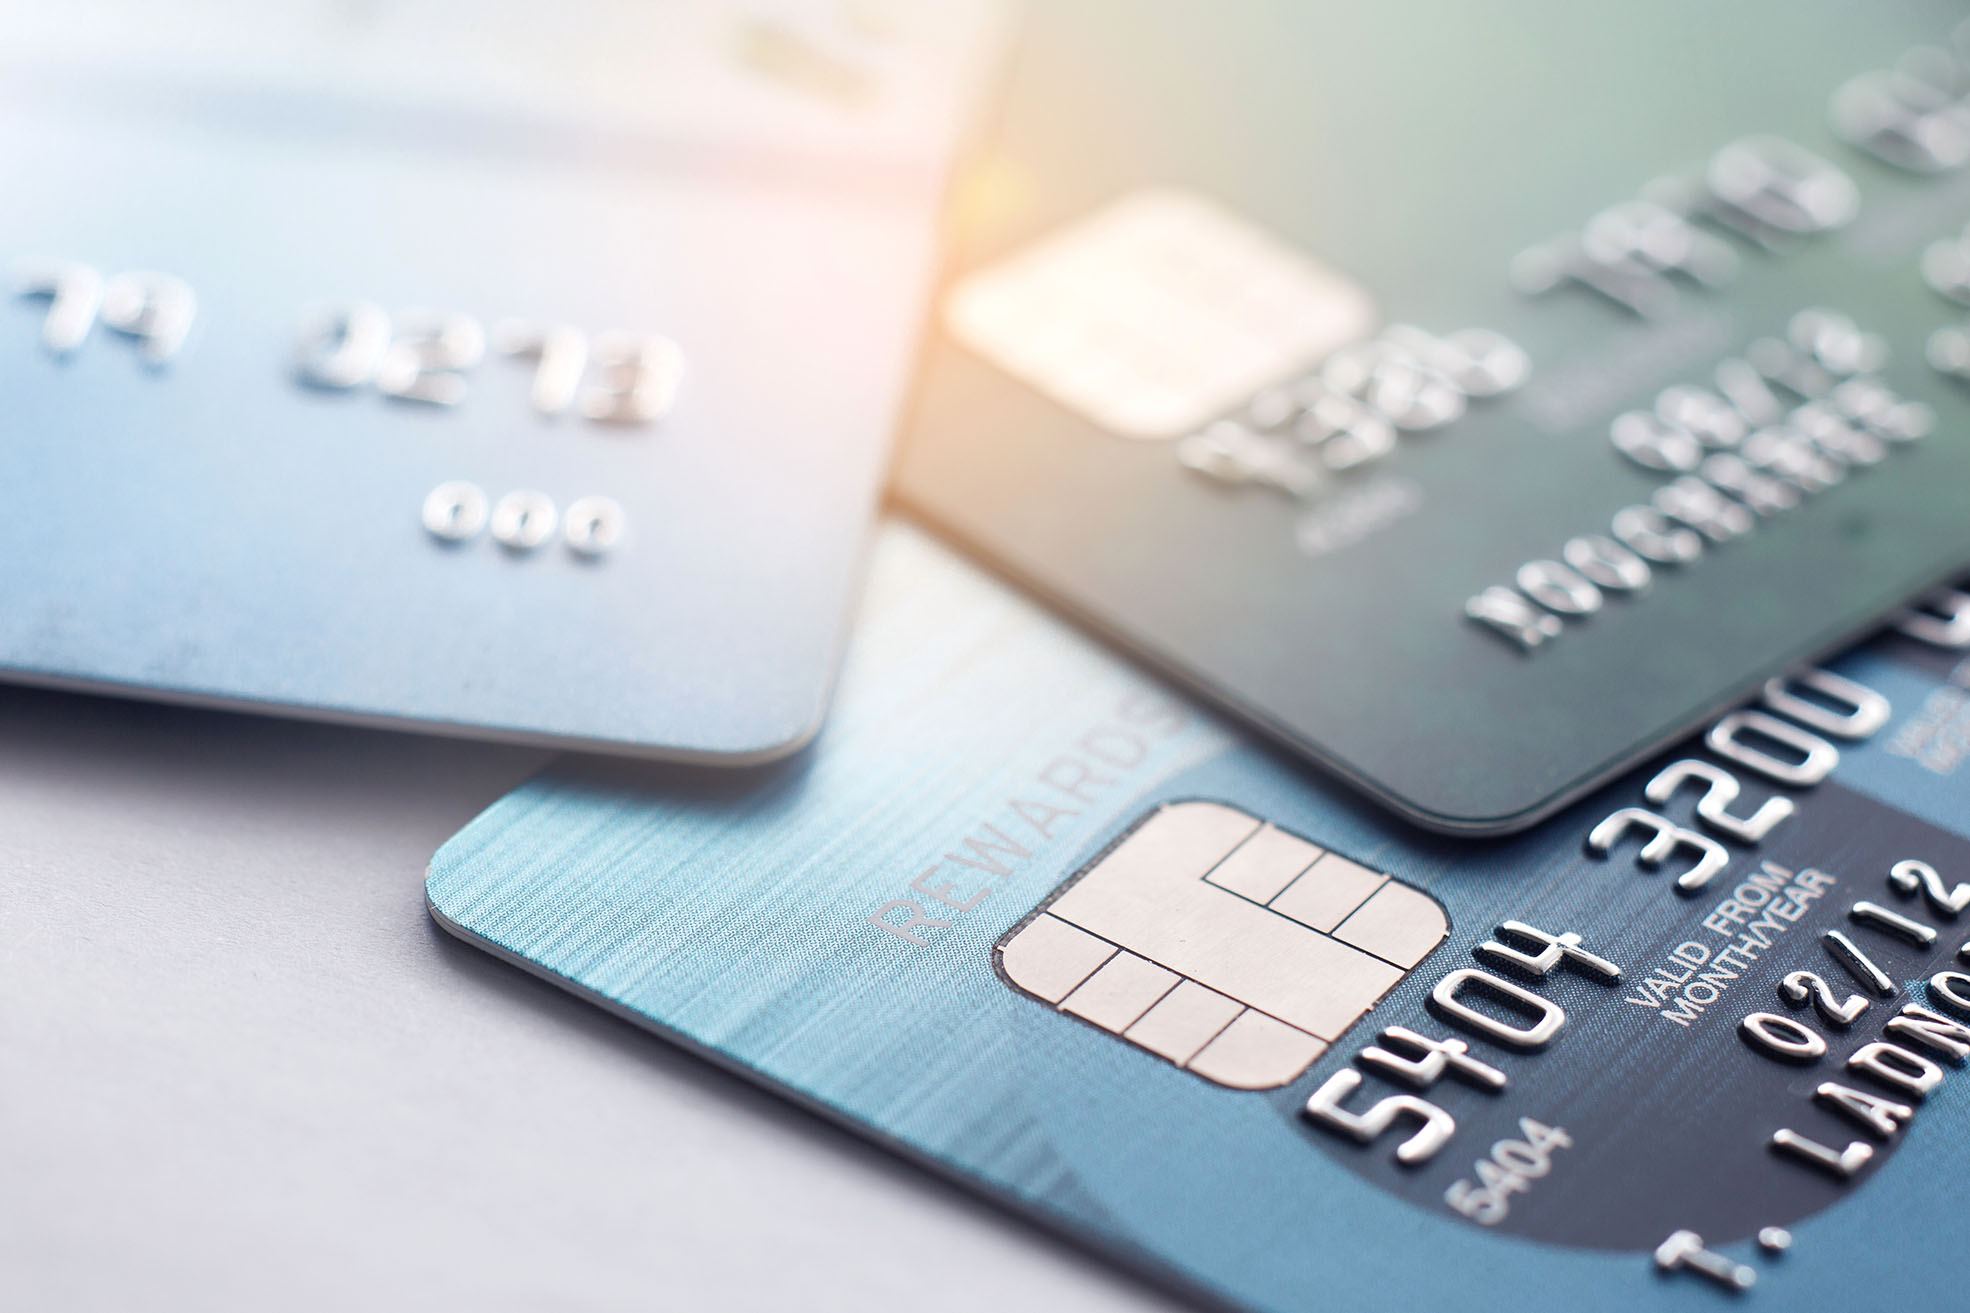 How to Lower Interest Rates on Credit Cards